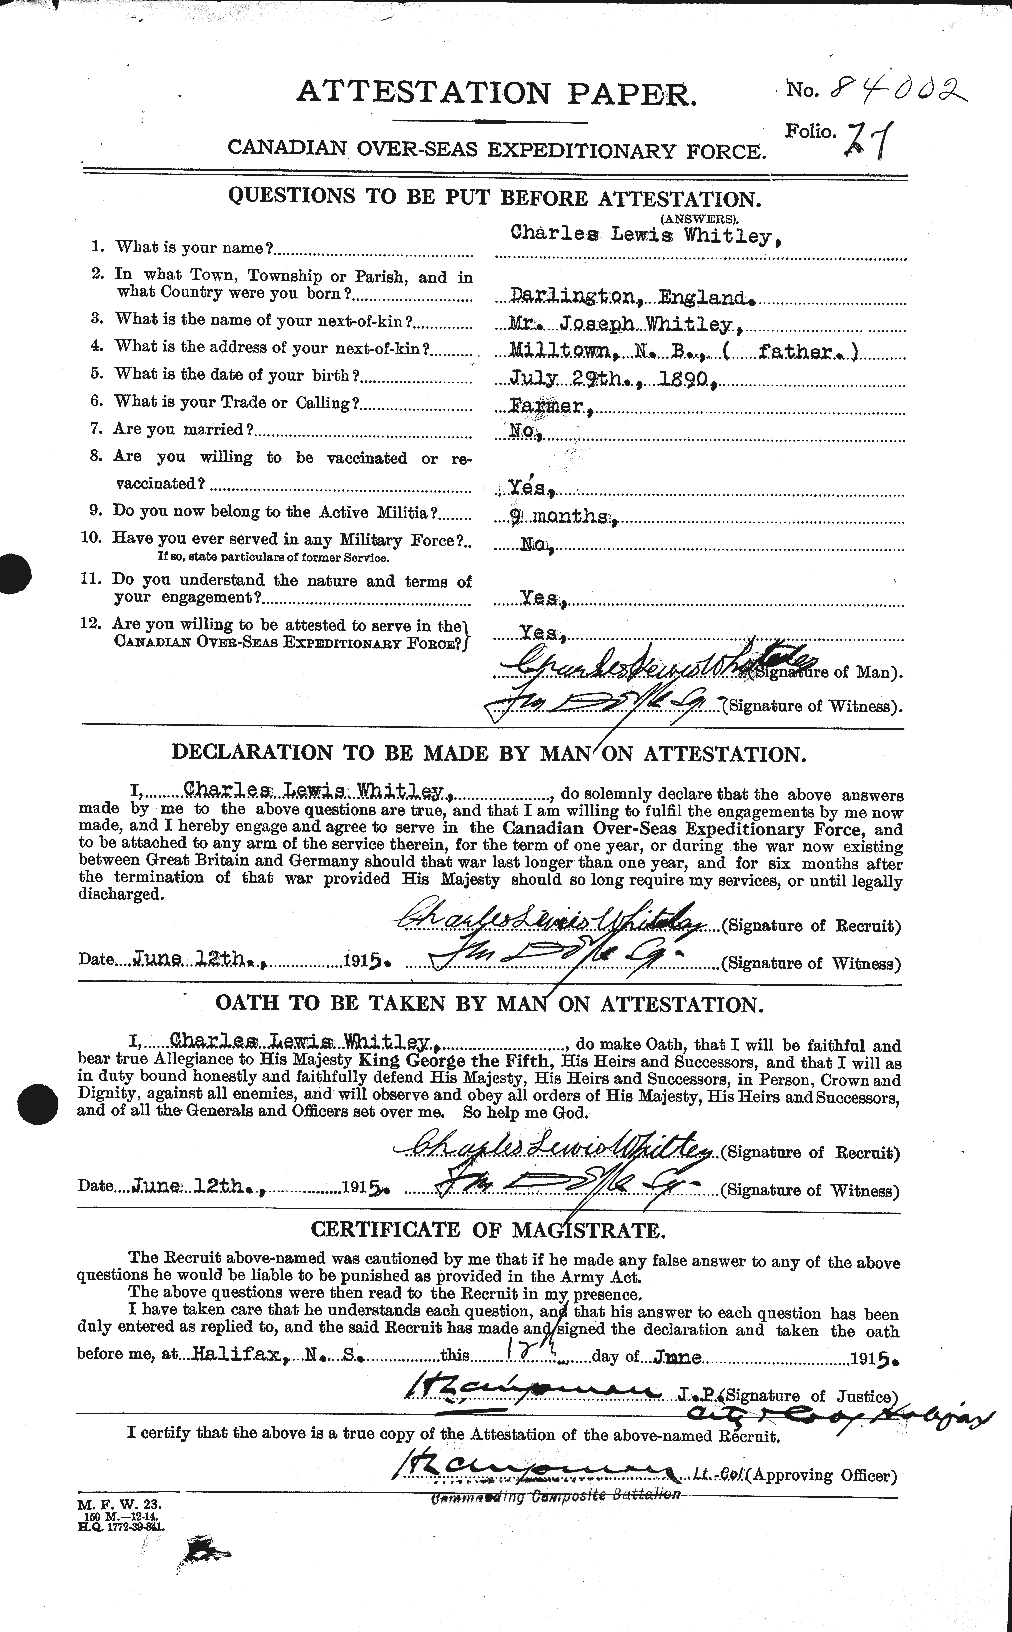 Personnel Records of the First World War - CEF 670923a